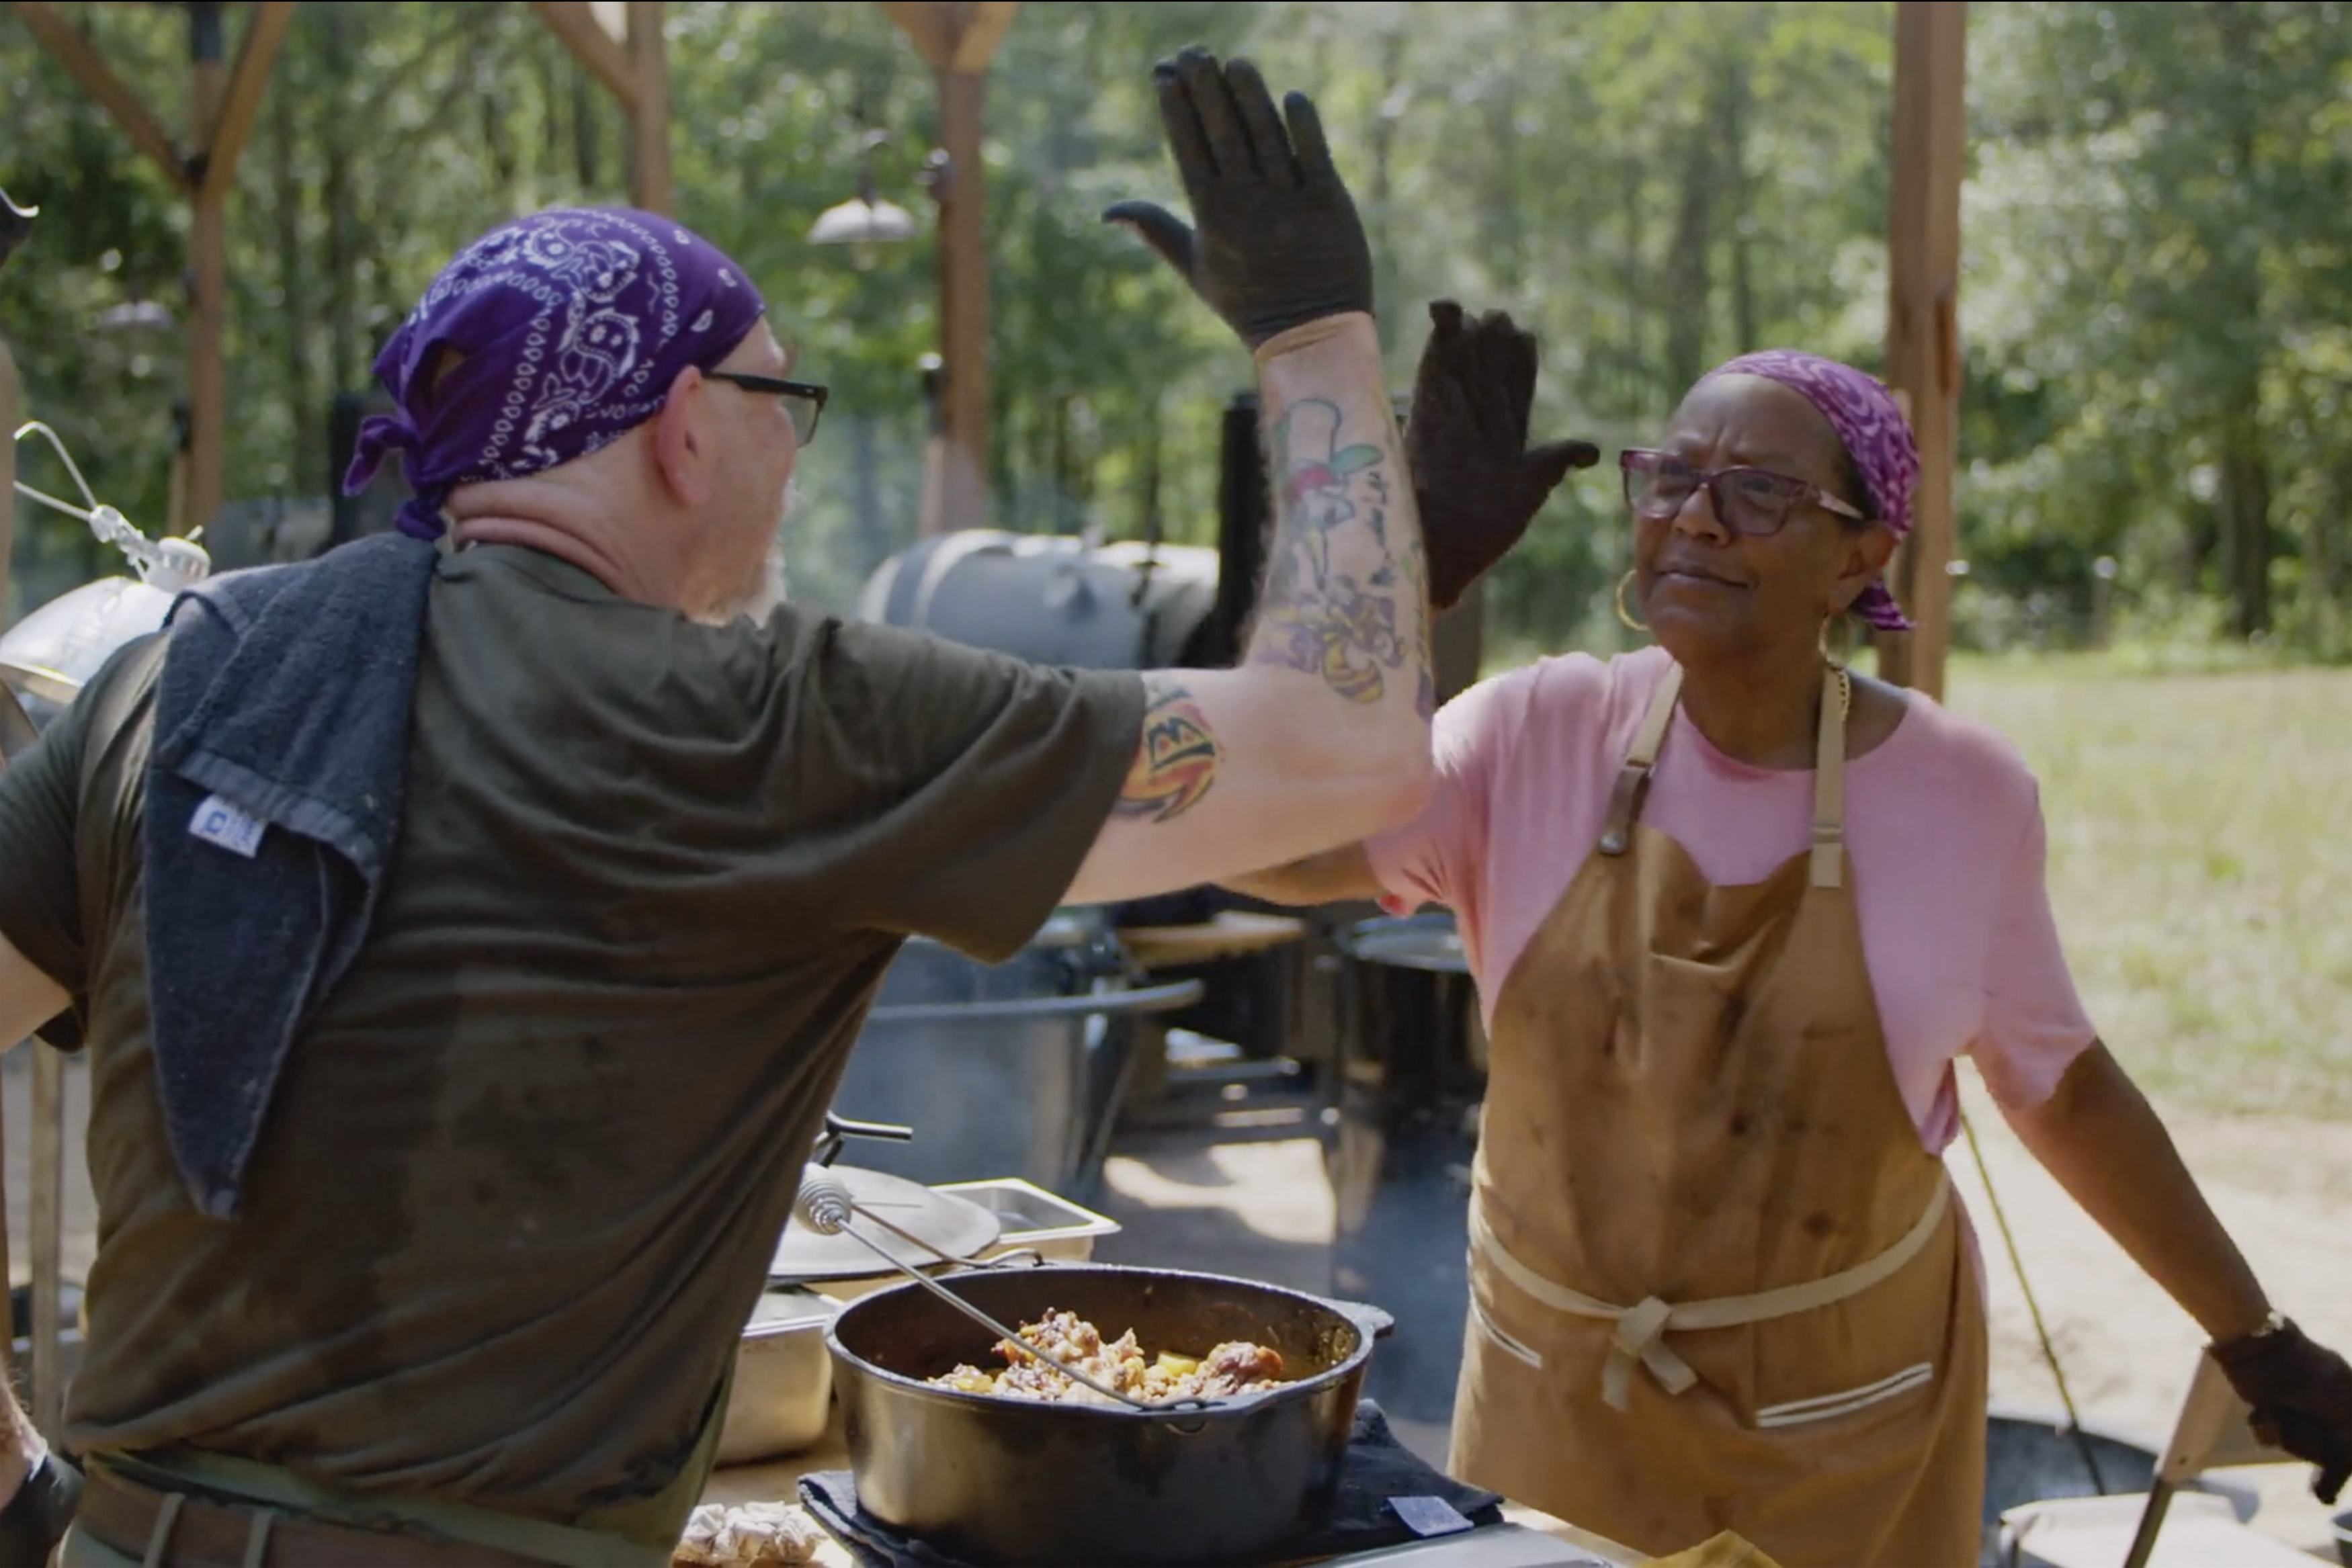 How to watch The American Barbecue Showdown on Netflix